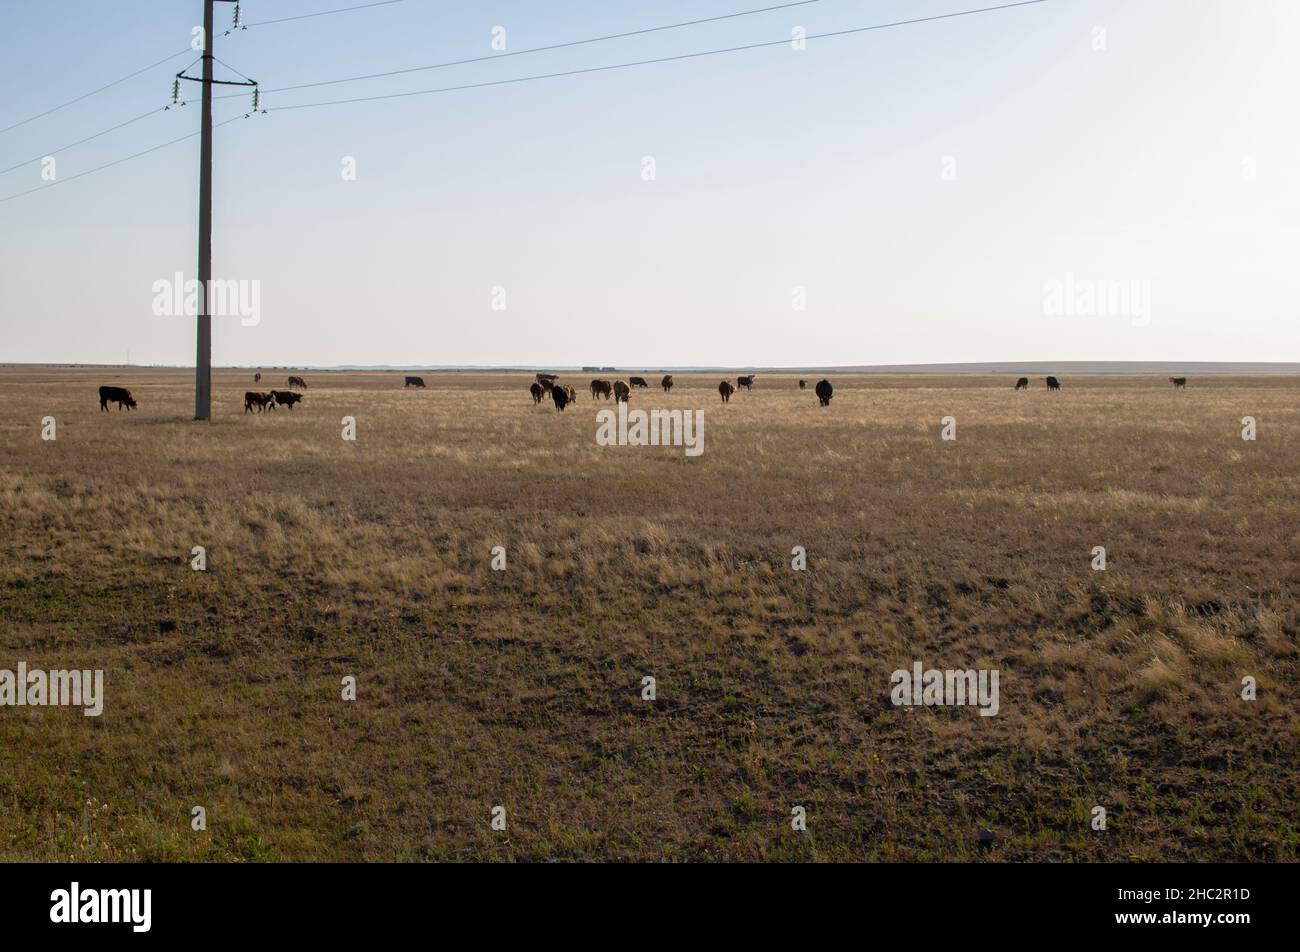 Cows grazing on steppe pastures in Kazakhstan, near Astana Stock Photo